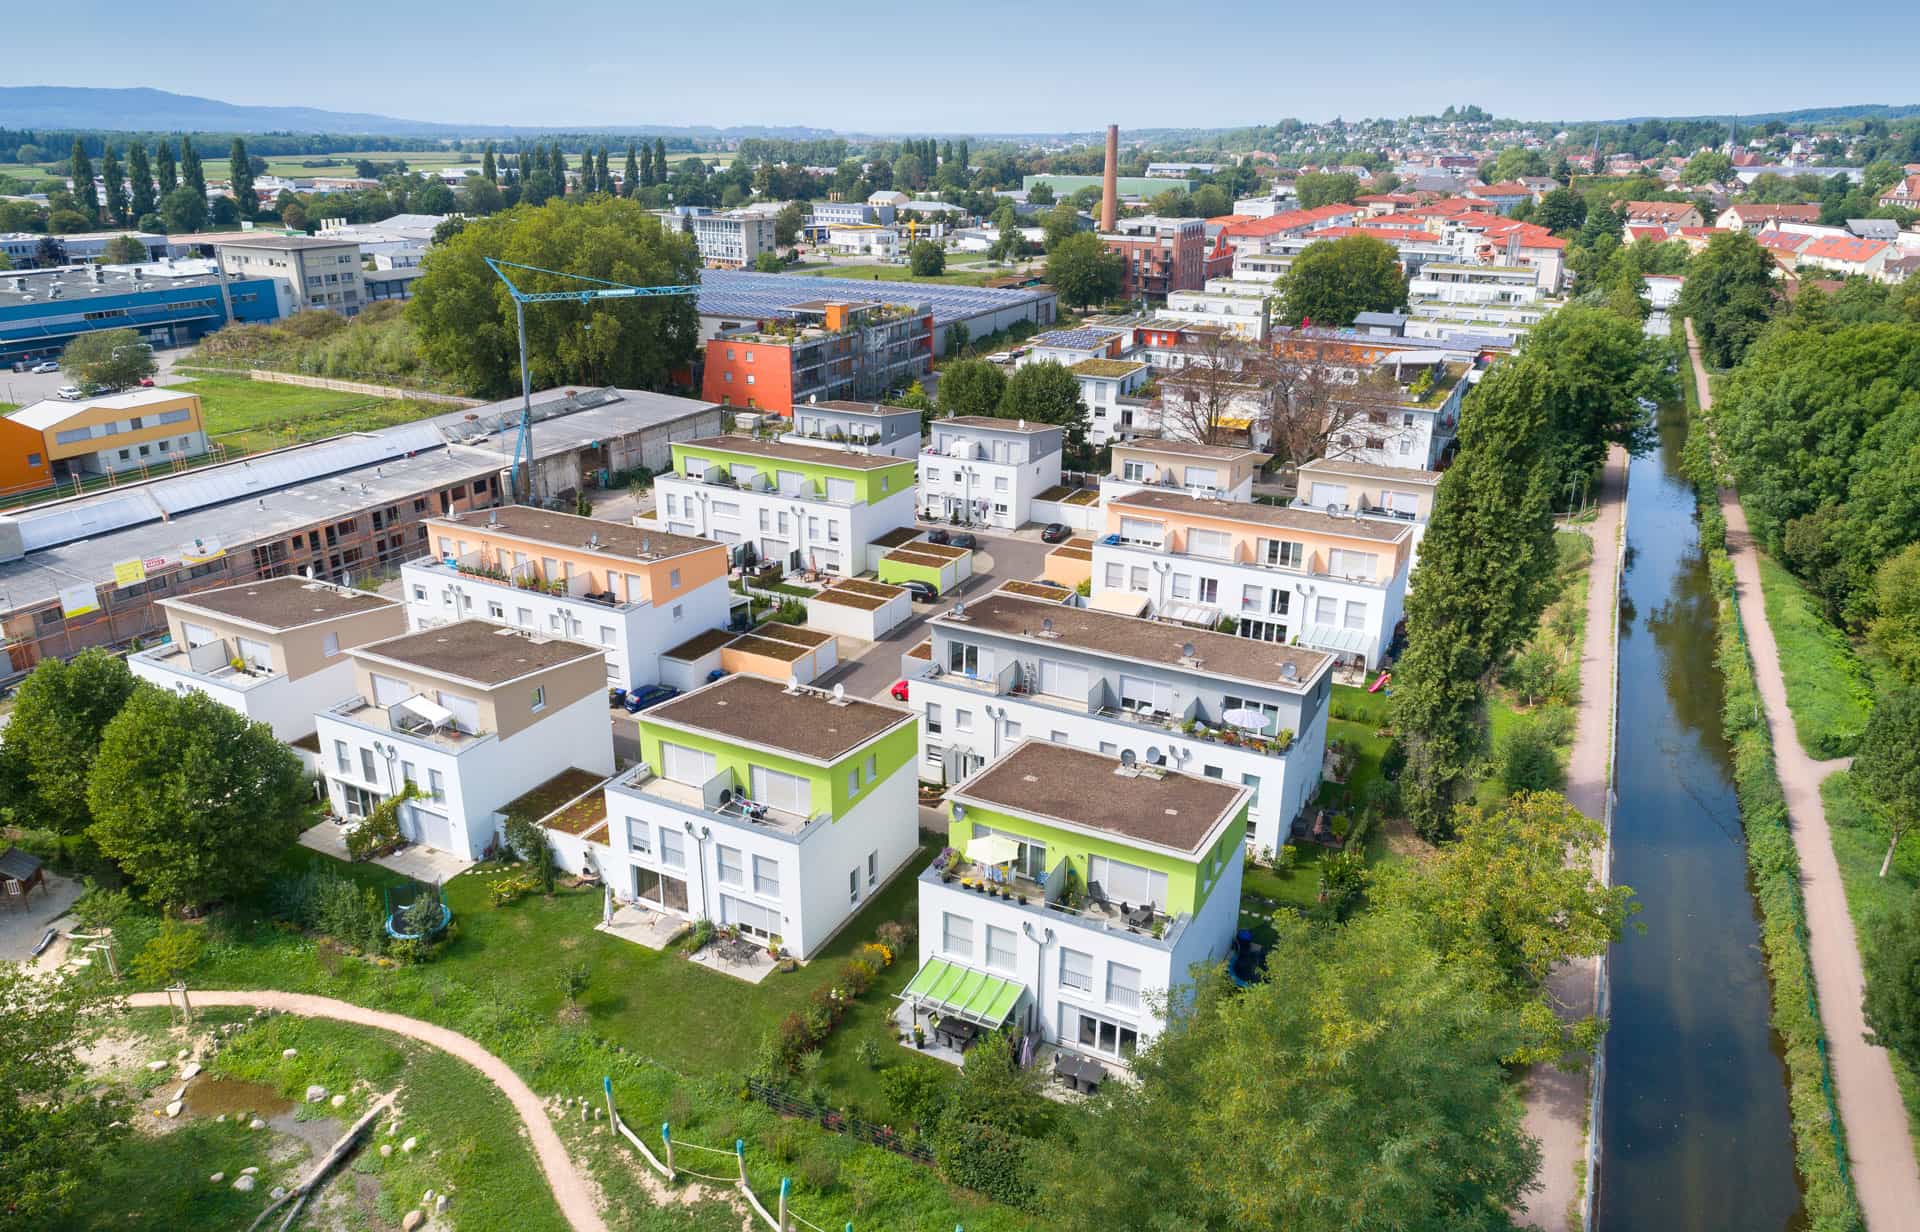 Drone recording of residential units in Emmendingen